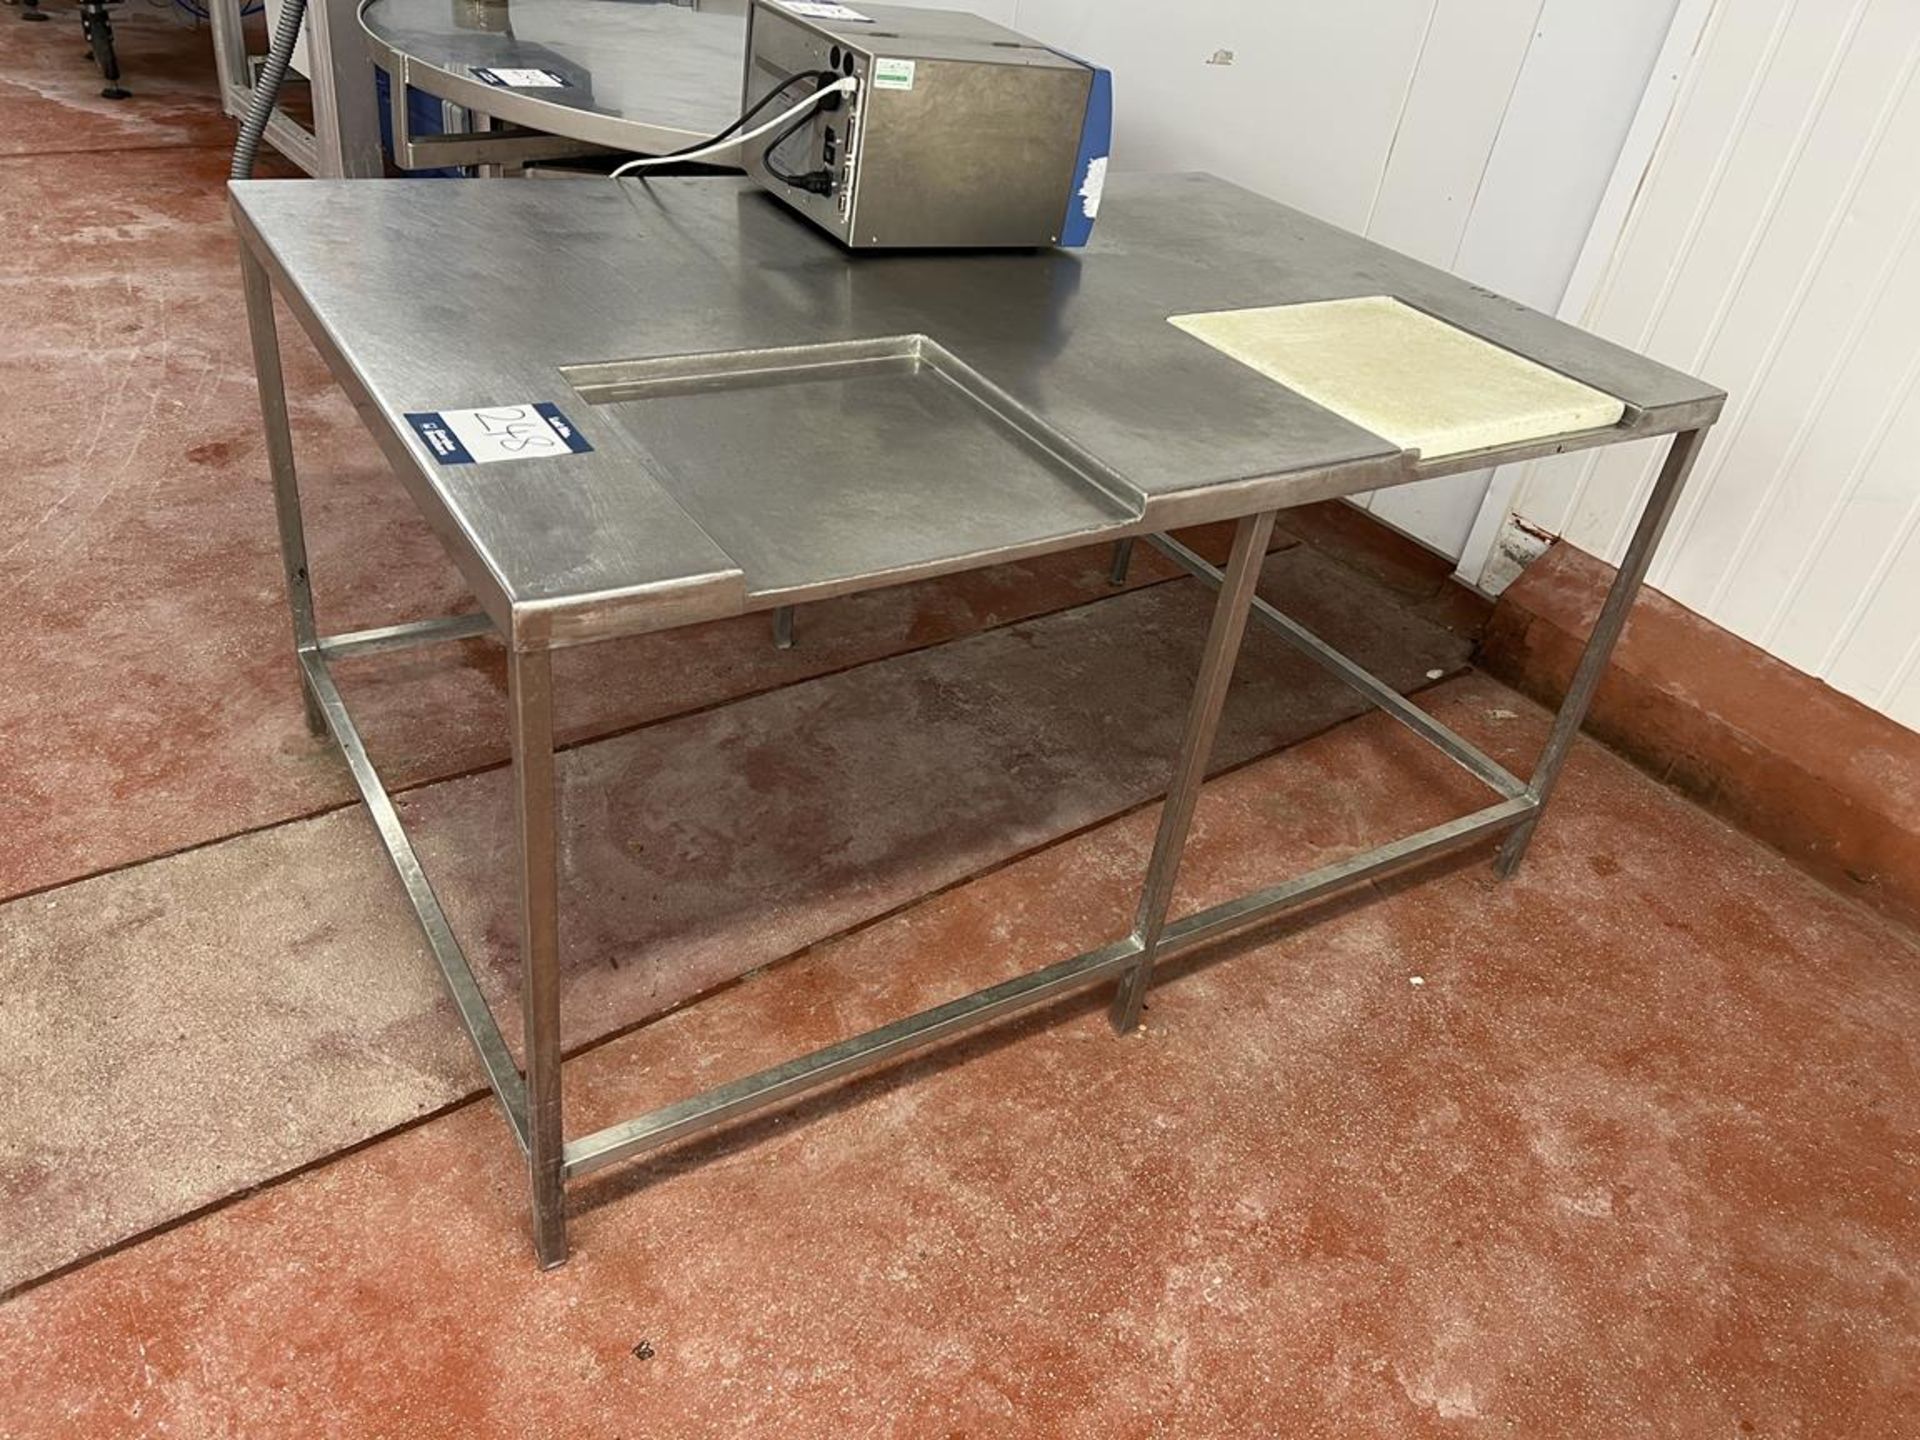 Stainless steel preparation table, 1550 x 1000mm